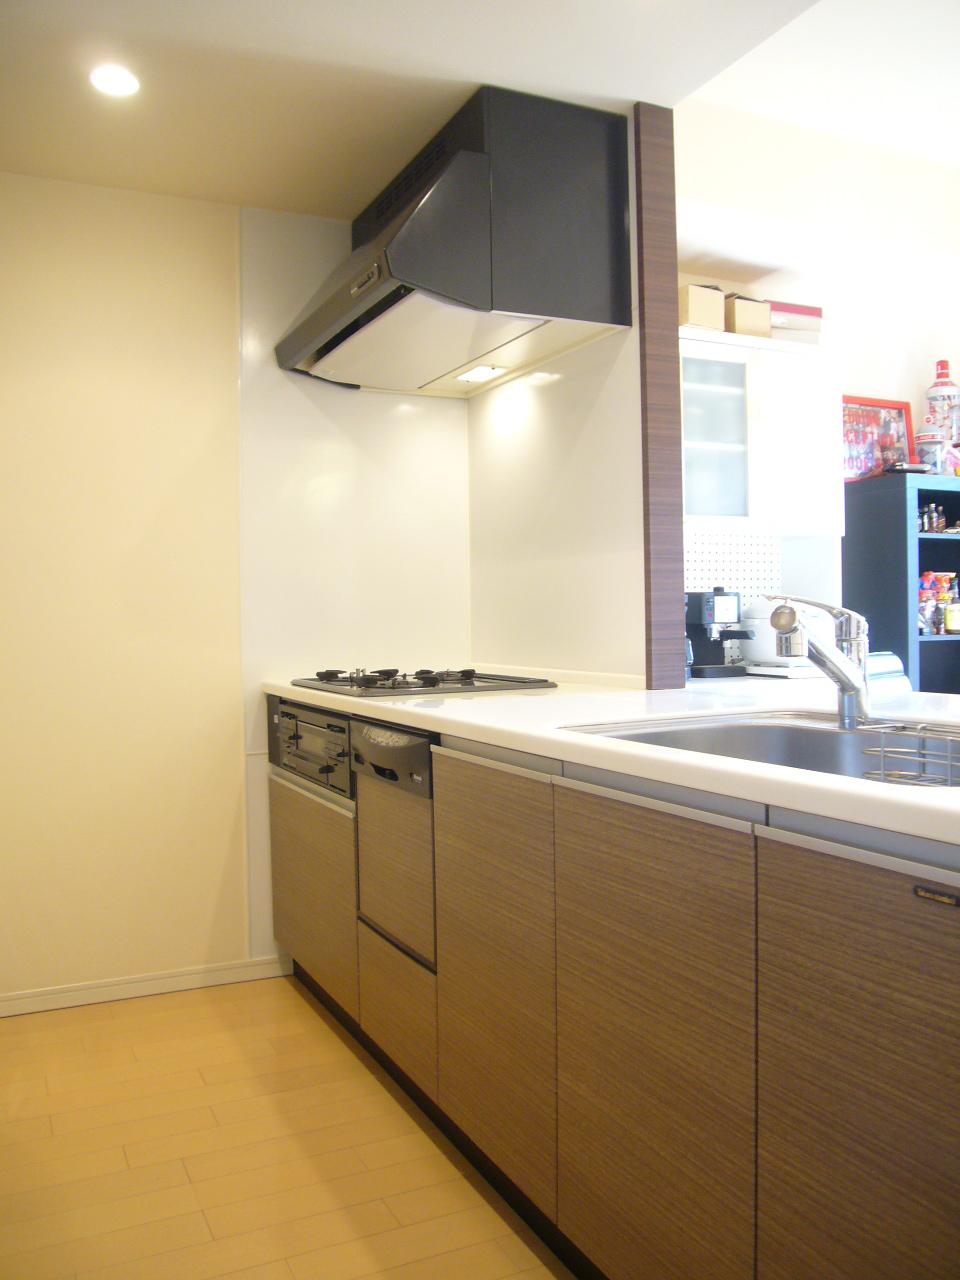 Kitchen.  ◆ Kitchen (January 2014) Shooting  ・ Low-noise wide-sink of a width of about 80cm!  ・ Dish washing and drying machine!  ・ Water purifier integrated mixing faucet!  ・ disposer!  ・ Of the heat-resistant enamel top 3-necked gas stove!  ・ Rectification Backed range hood!